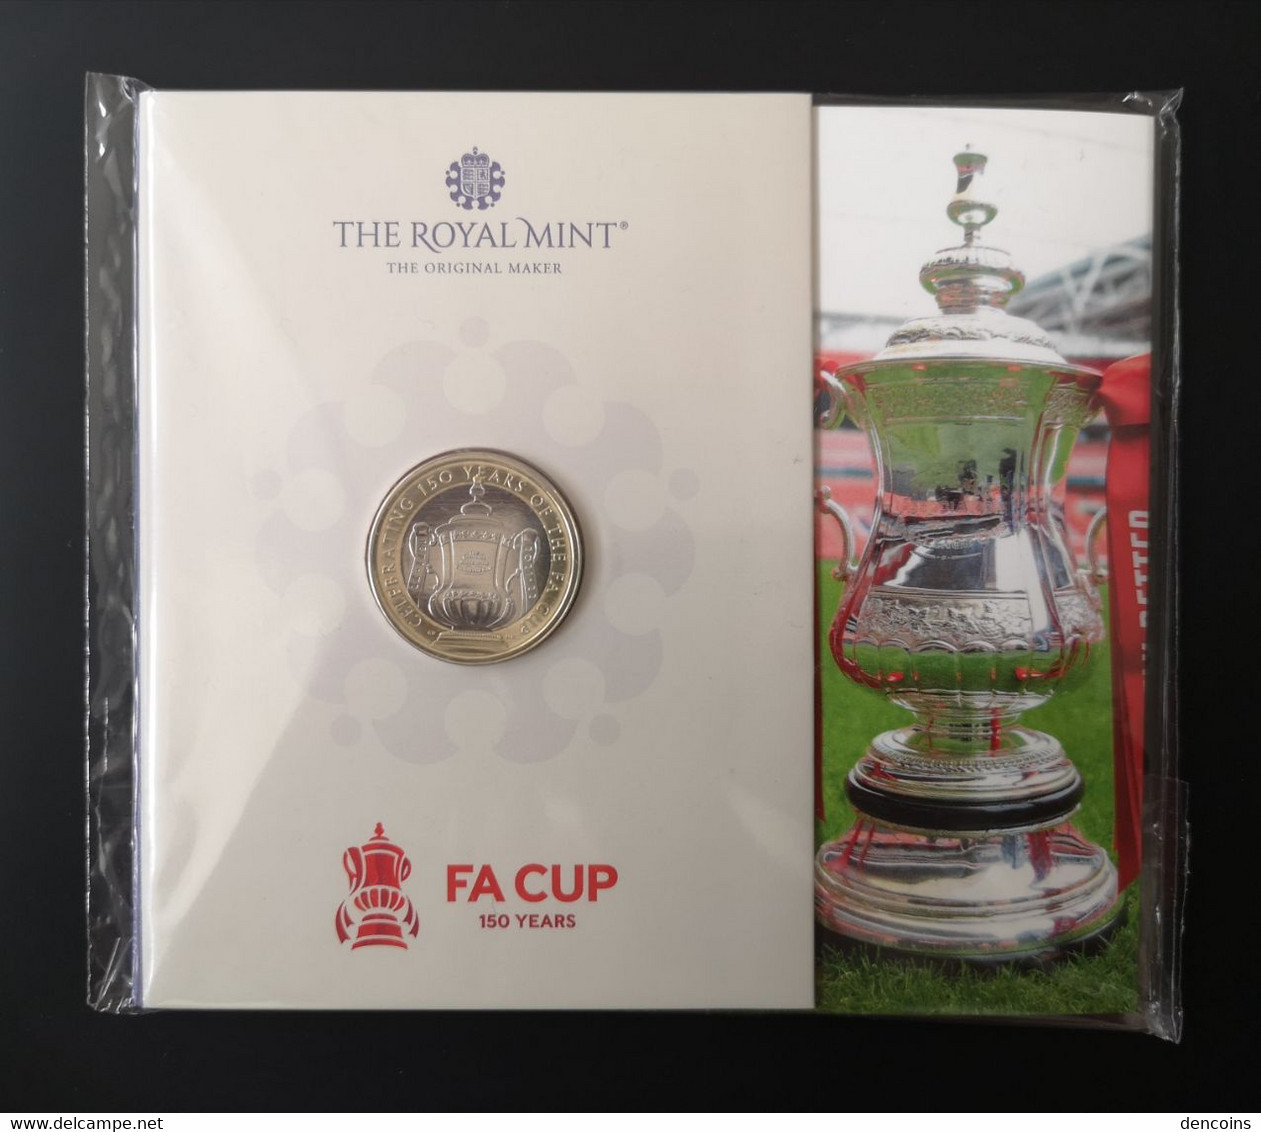 2 POUNDS GREAT BRITAIN 2022 THE 150TH ANNIVERSARY OF THE FA CUP - £2 - 2 LIBRAS GRAN BRETAÑA GB - NEUF - NEW - 2 Pounds